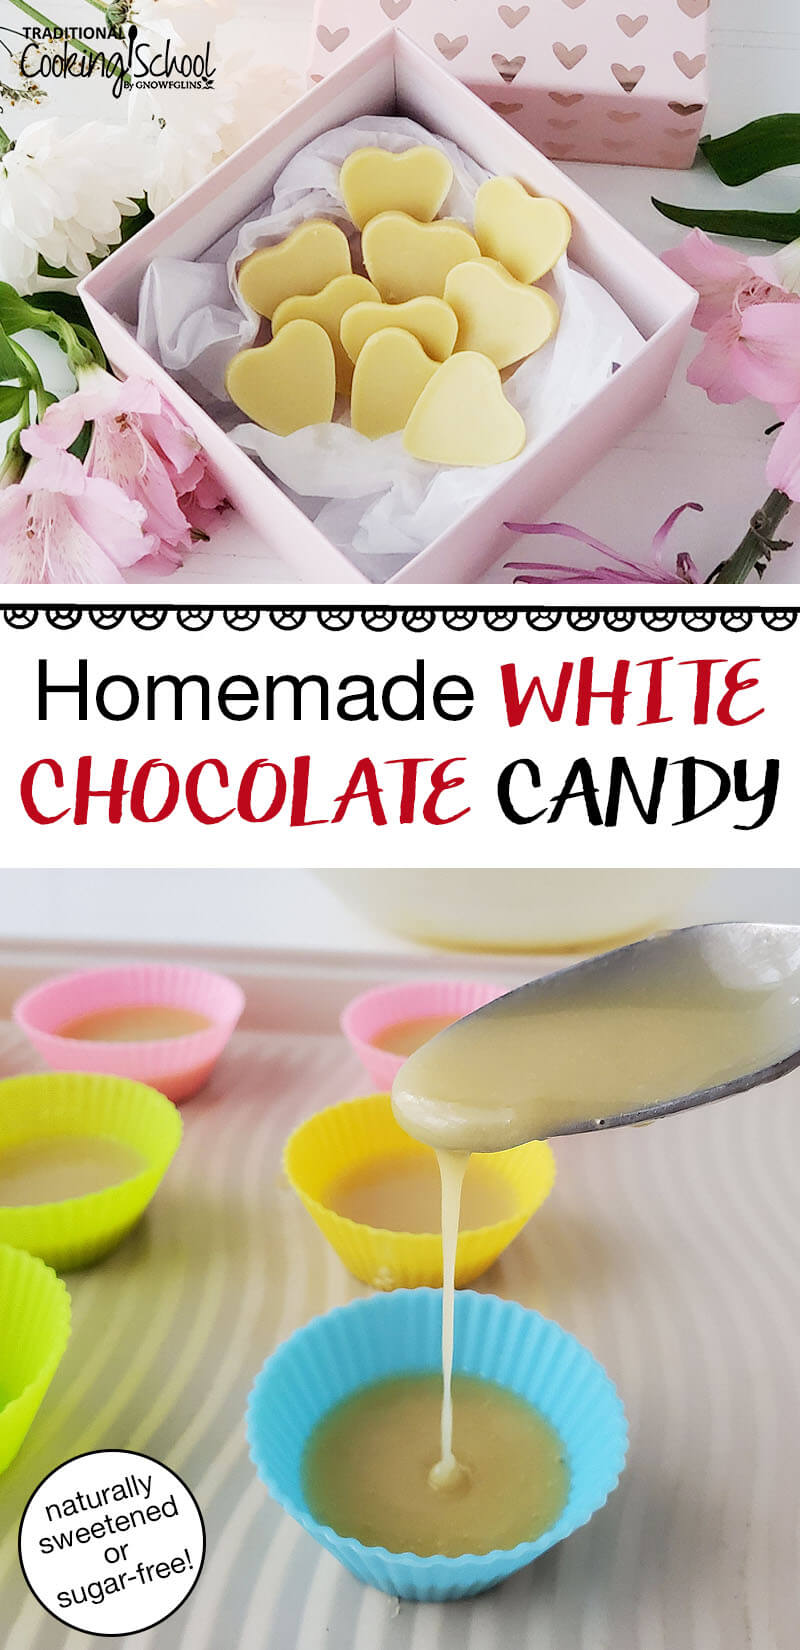 photo collage of making homemade candy, including pouring it into molds, and heart-shaped candies arrayed in a decorative box, with text overlay: "Homemade White Chocolate Candy (naturally sweetened or sugar-free!)"